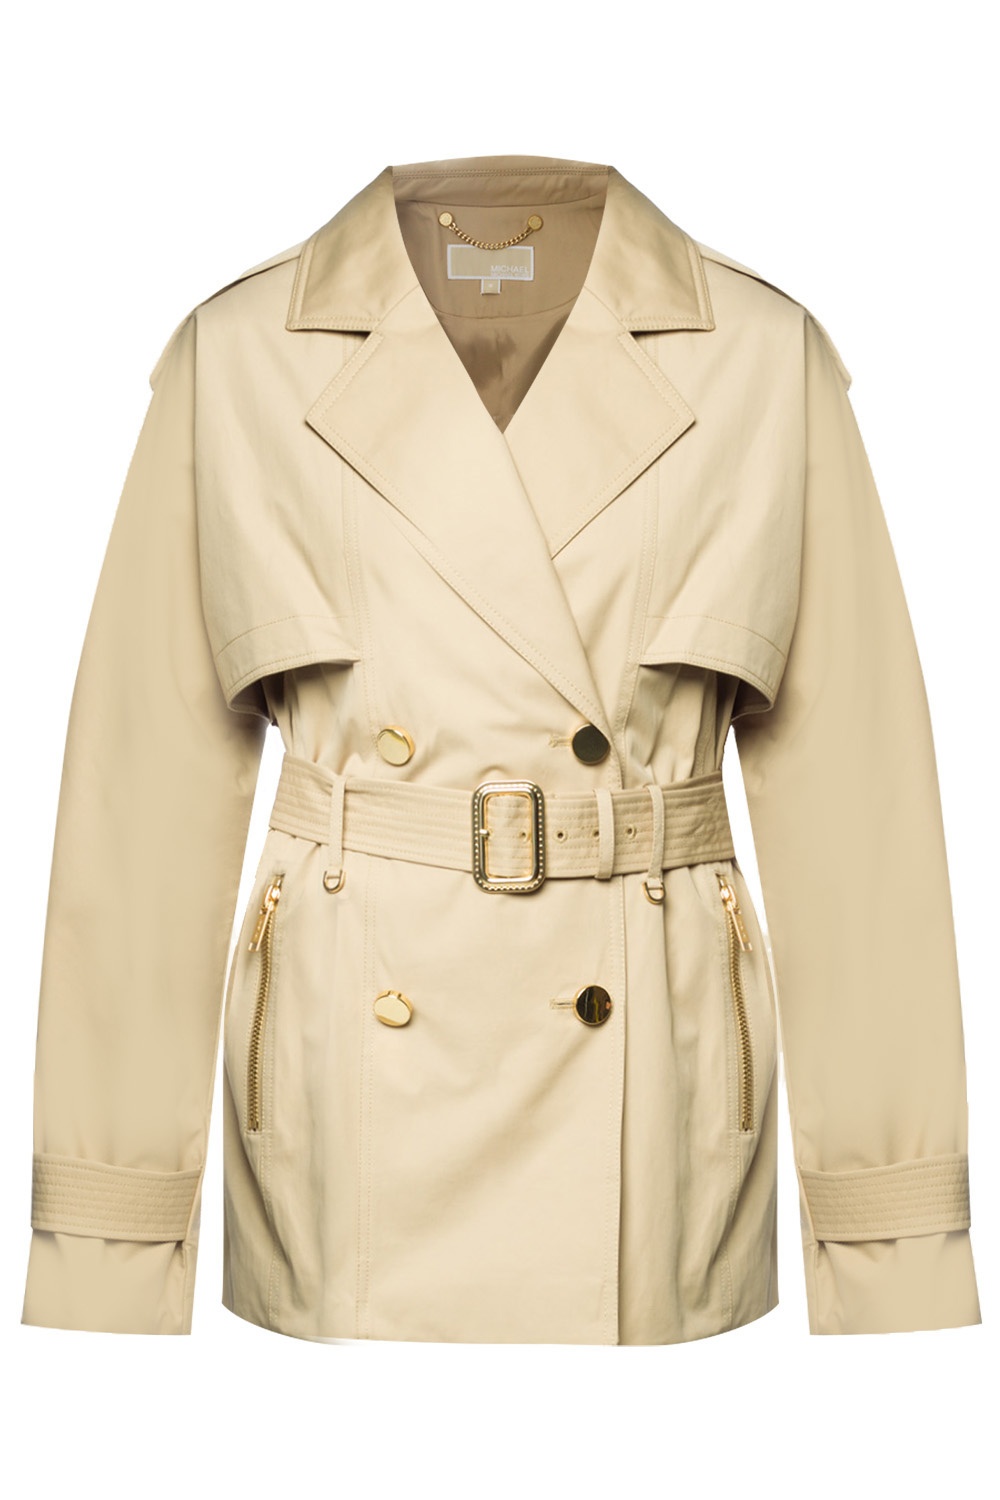 Michael Michael Kors Double-breasted trench coat | Women's Clothing | Vitkac